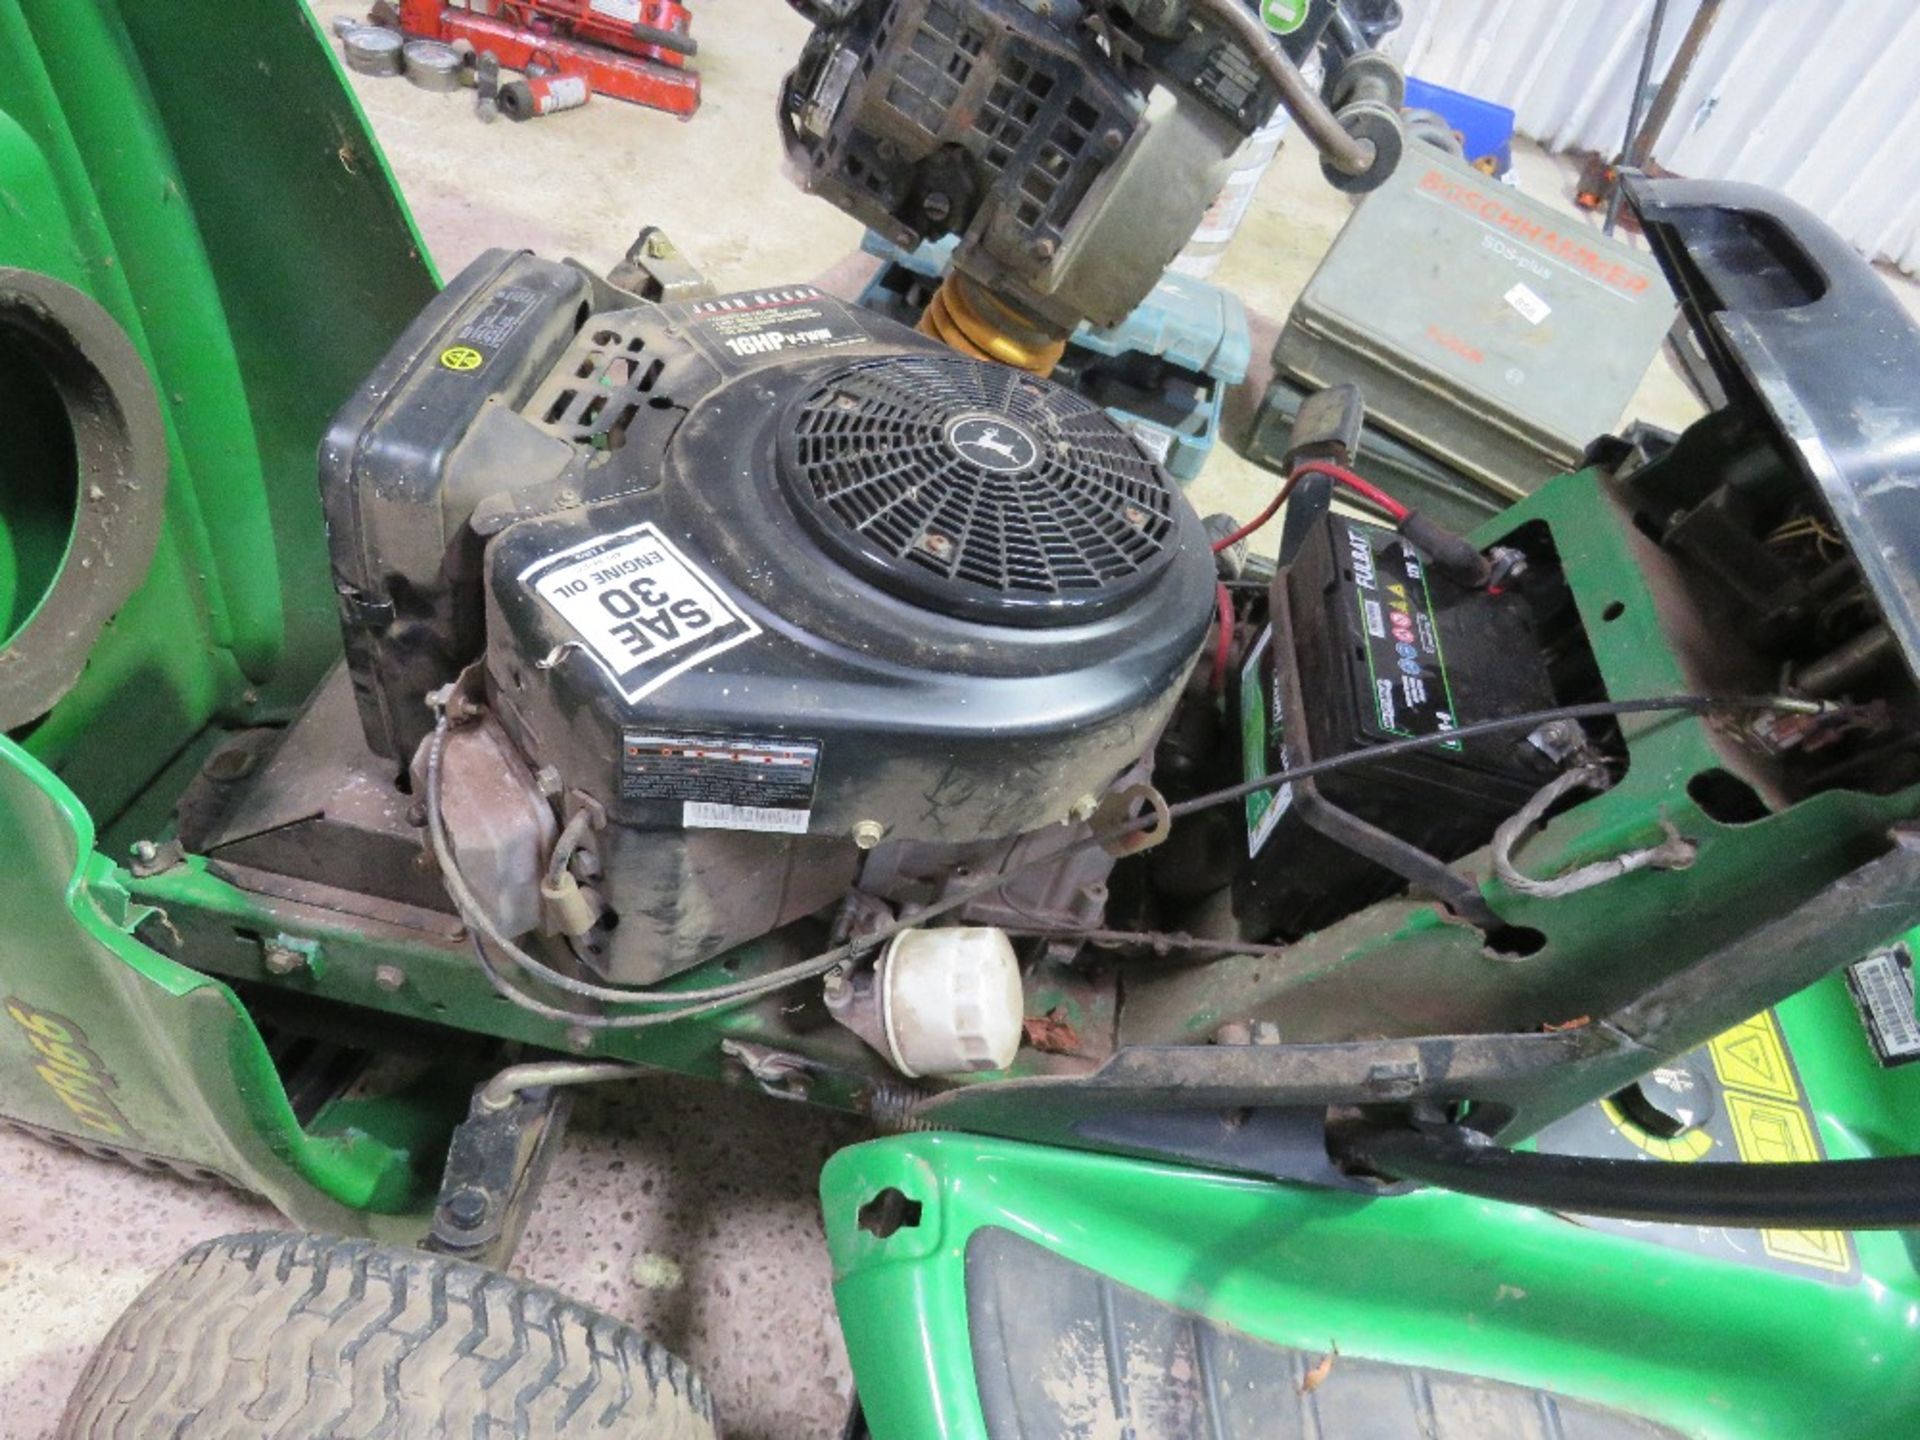 JOHN DEERE LTR166 RIDE ON MOWER. WHEN TESTED WAS SEEN TO RUN AND DRIVE BUT MOWER NOT ENGAGING (NO BE - Image 6 of 8